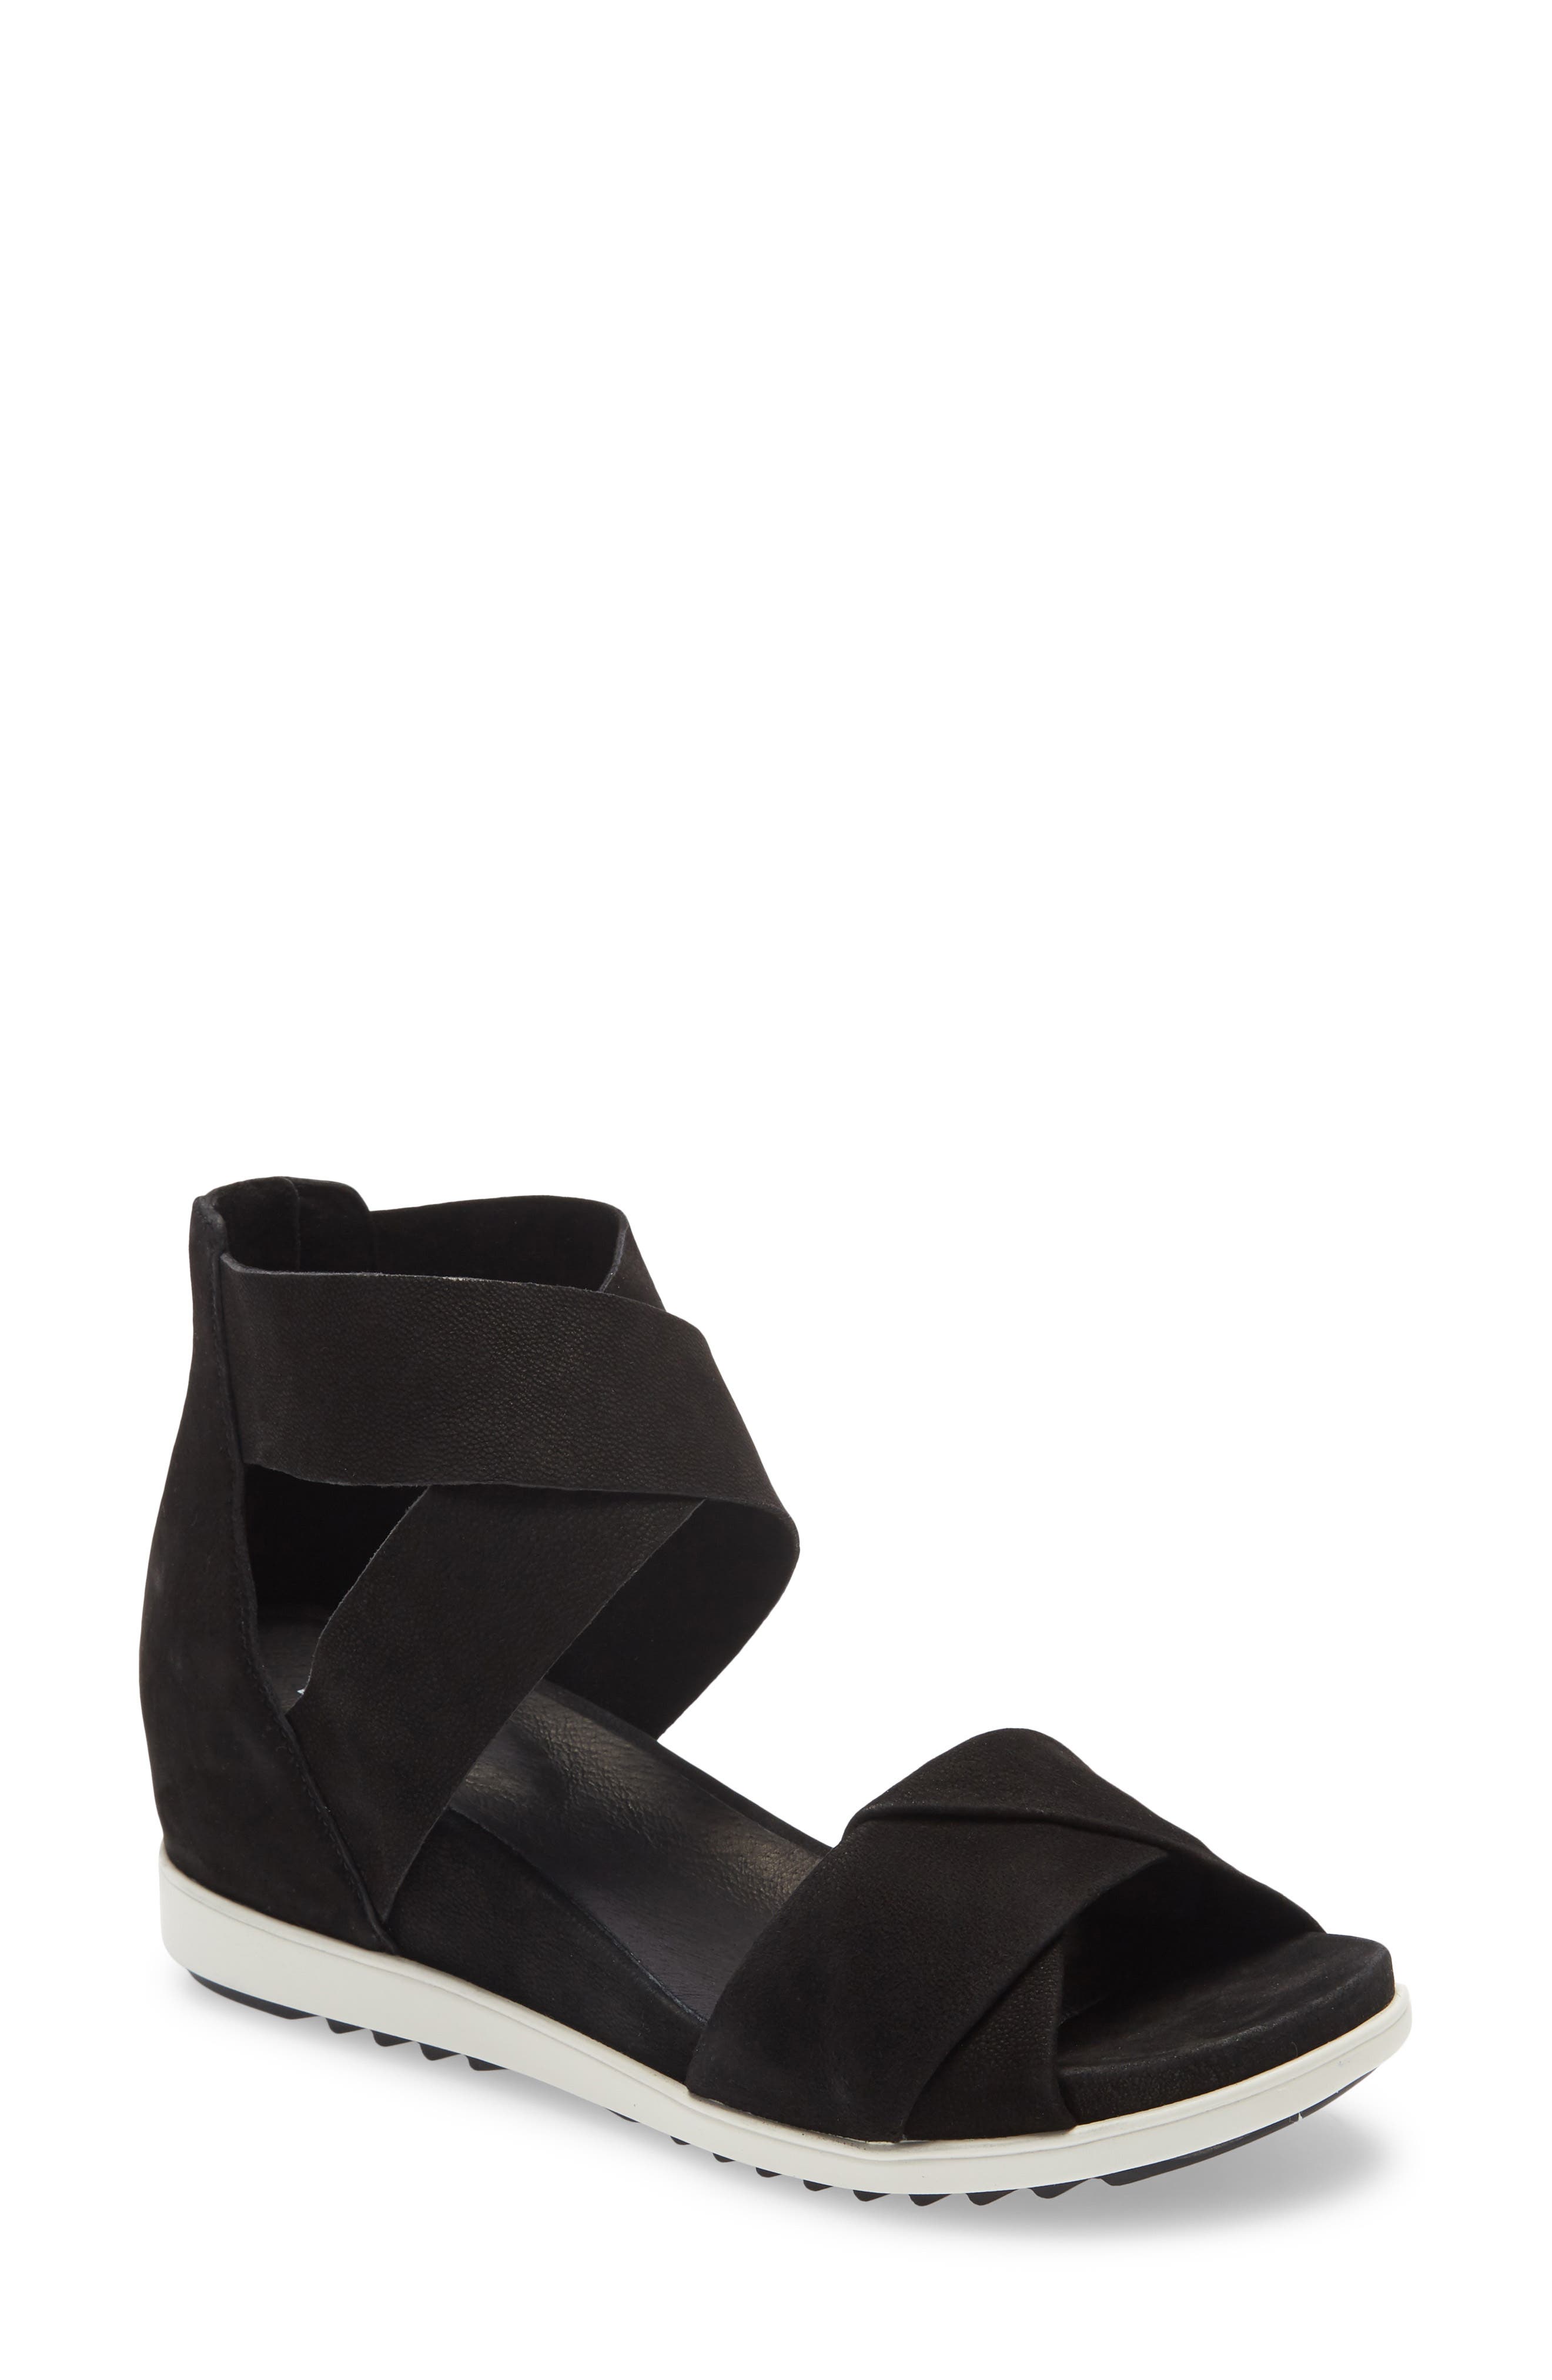 eileen fisher carole shoes